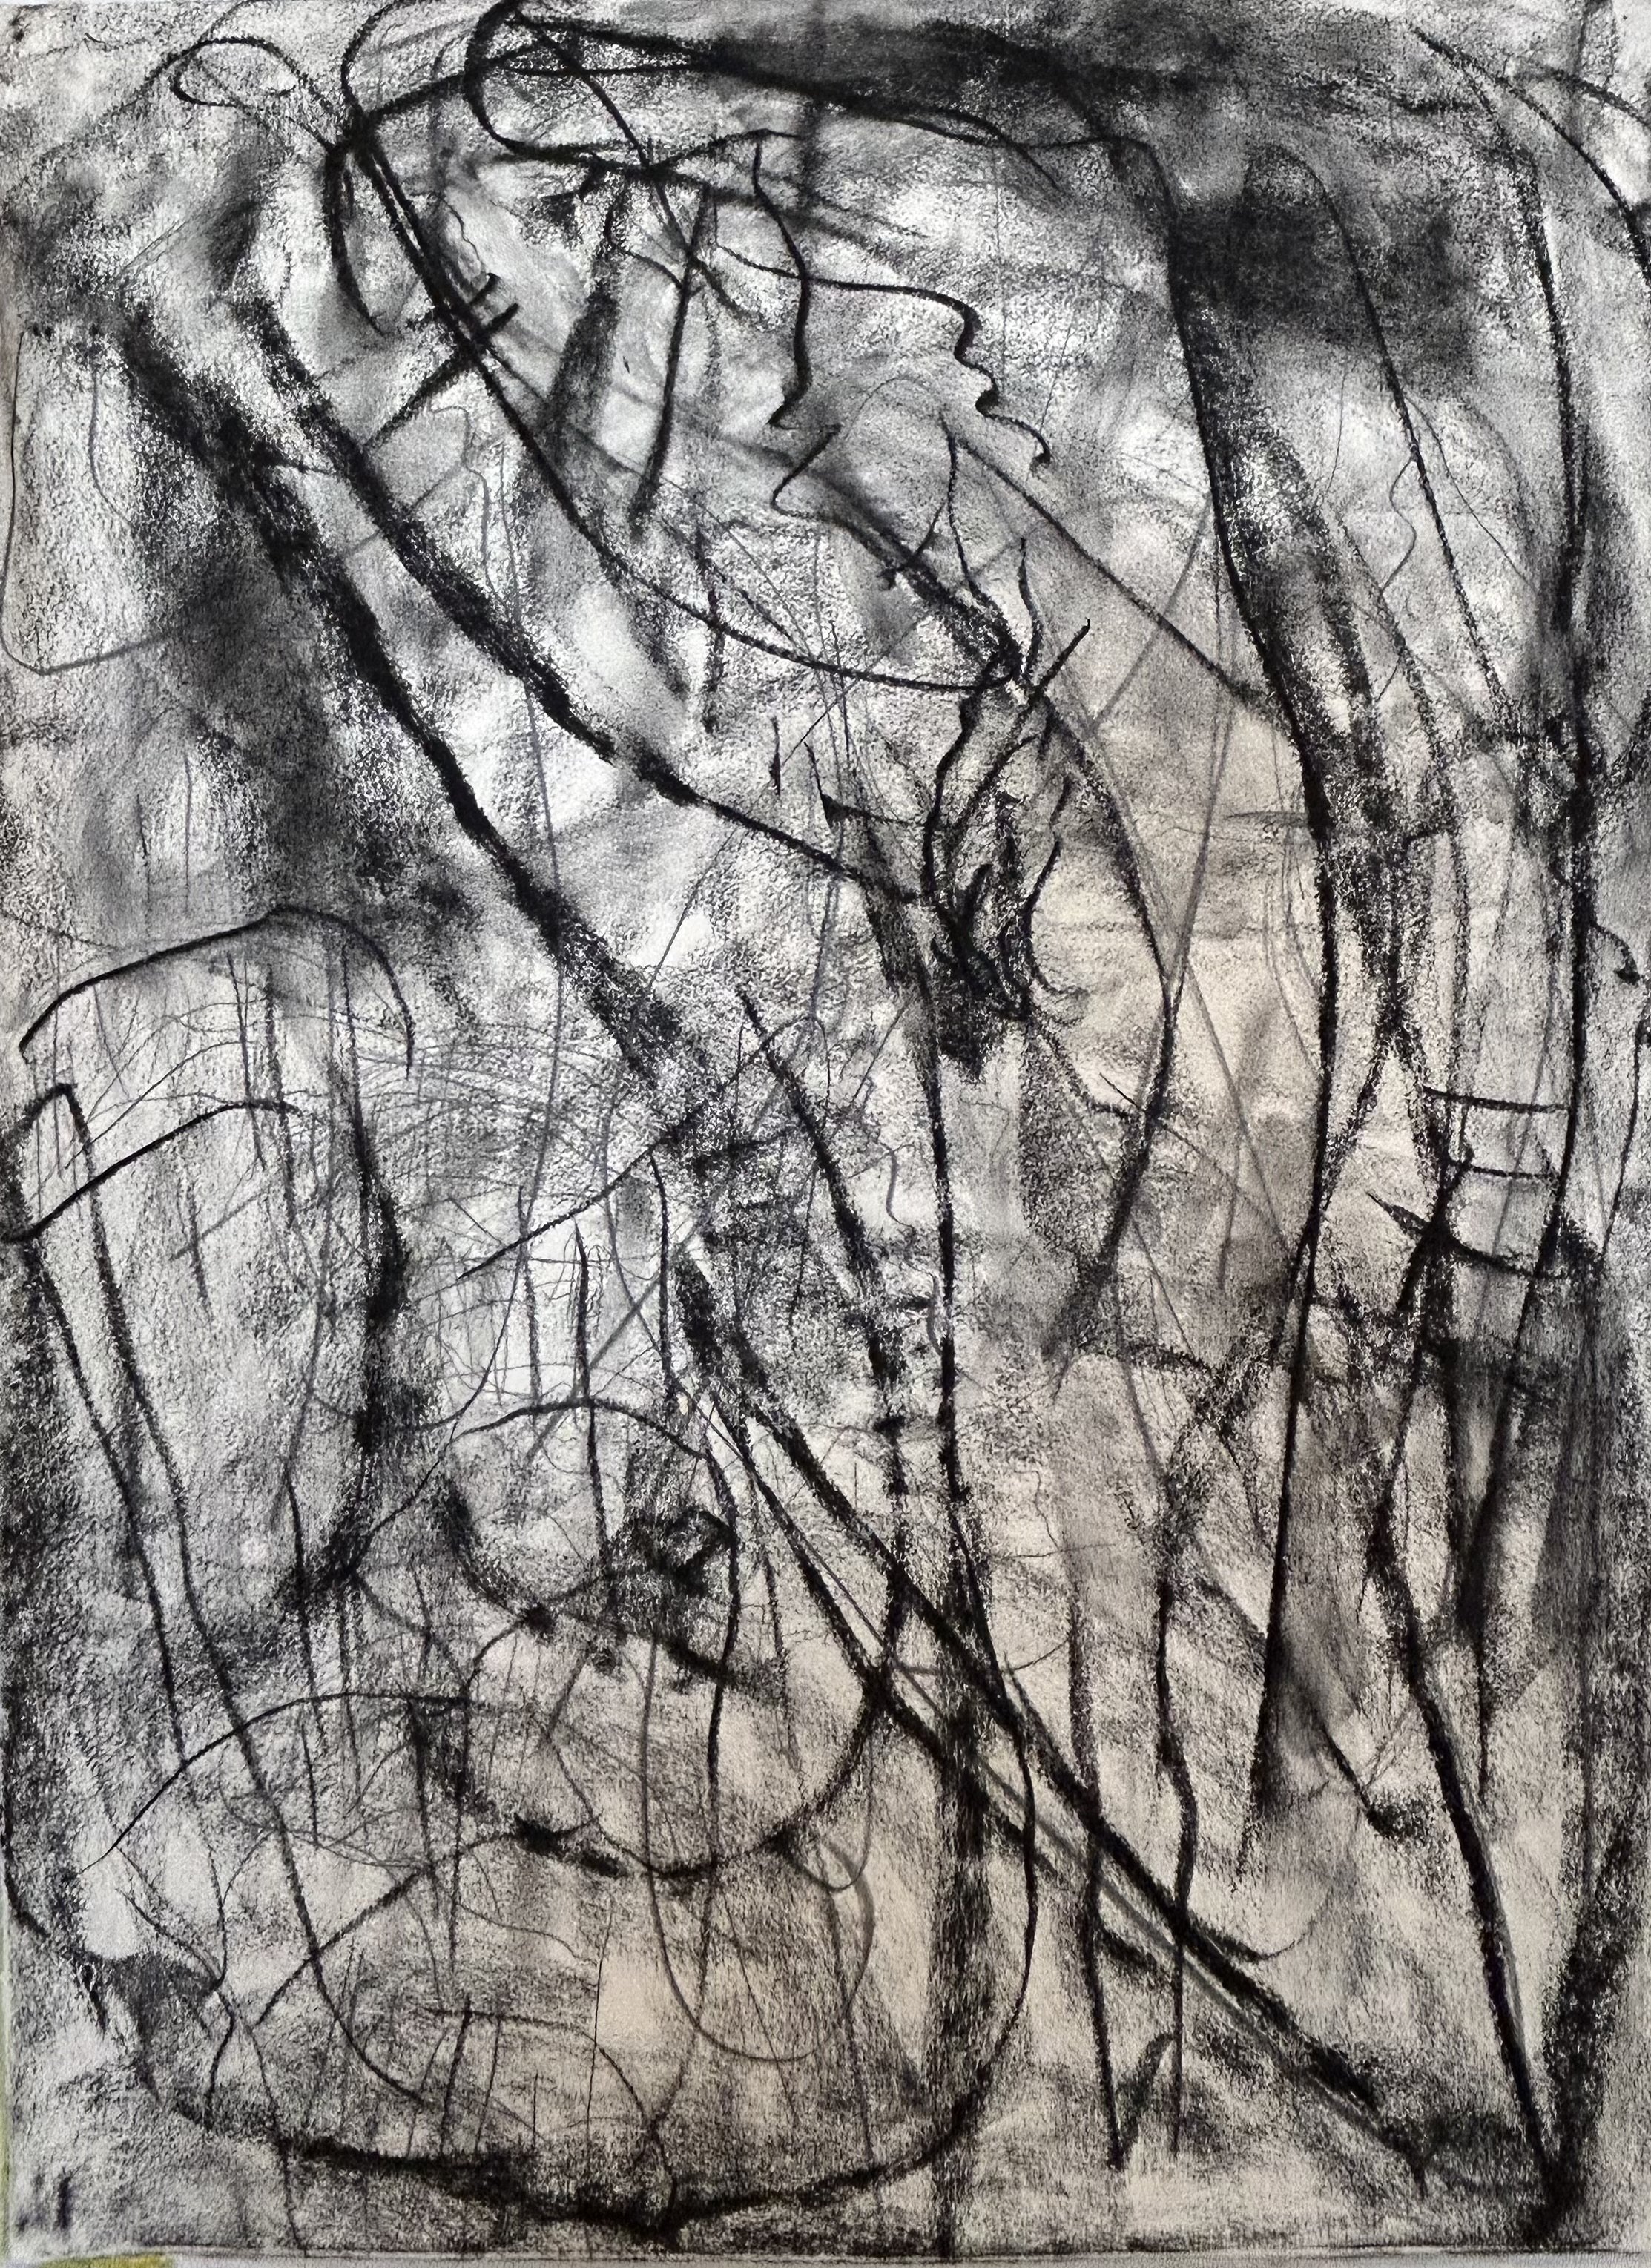 “Up Towards the Sky” 5-16-2014, charcoal & pencil  on Arches coverwhite, 39”x22”